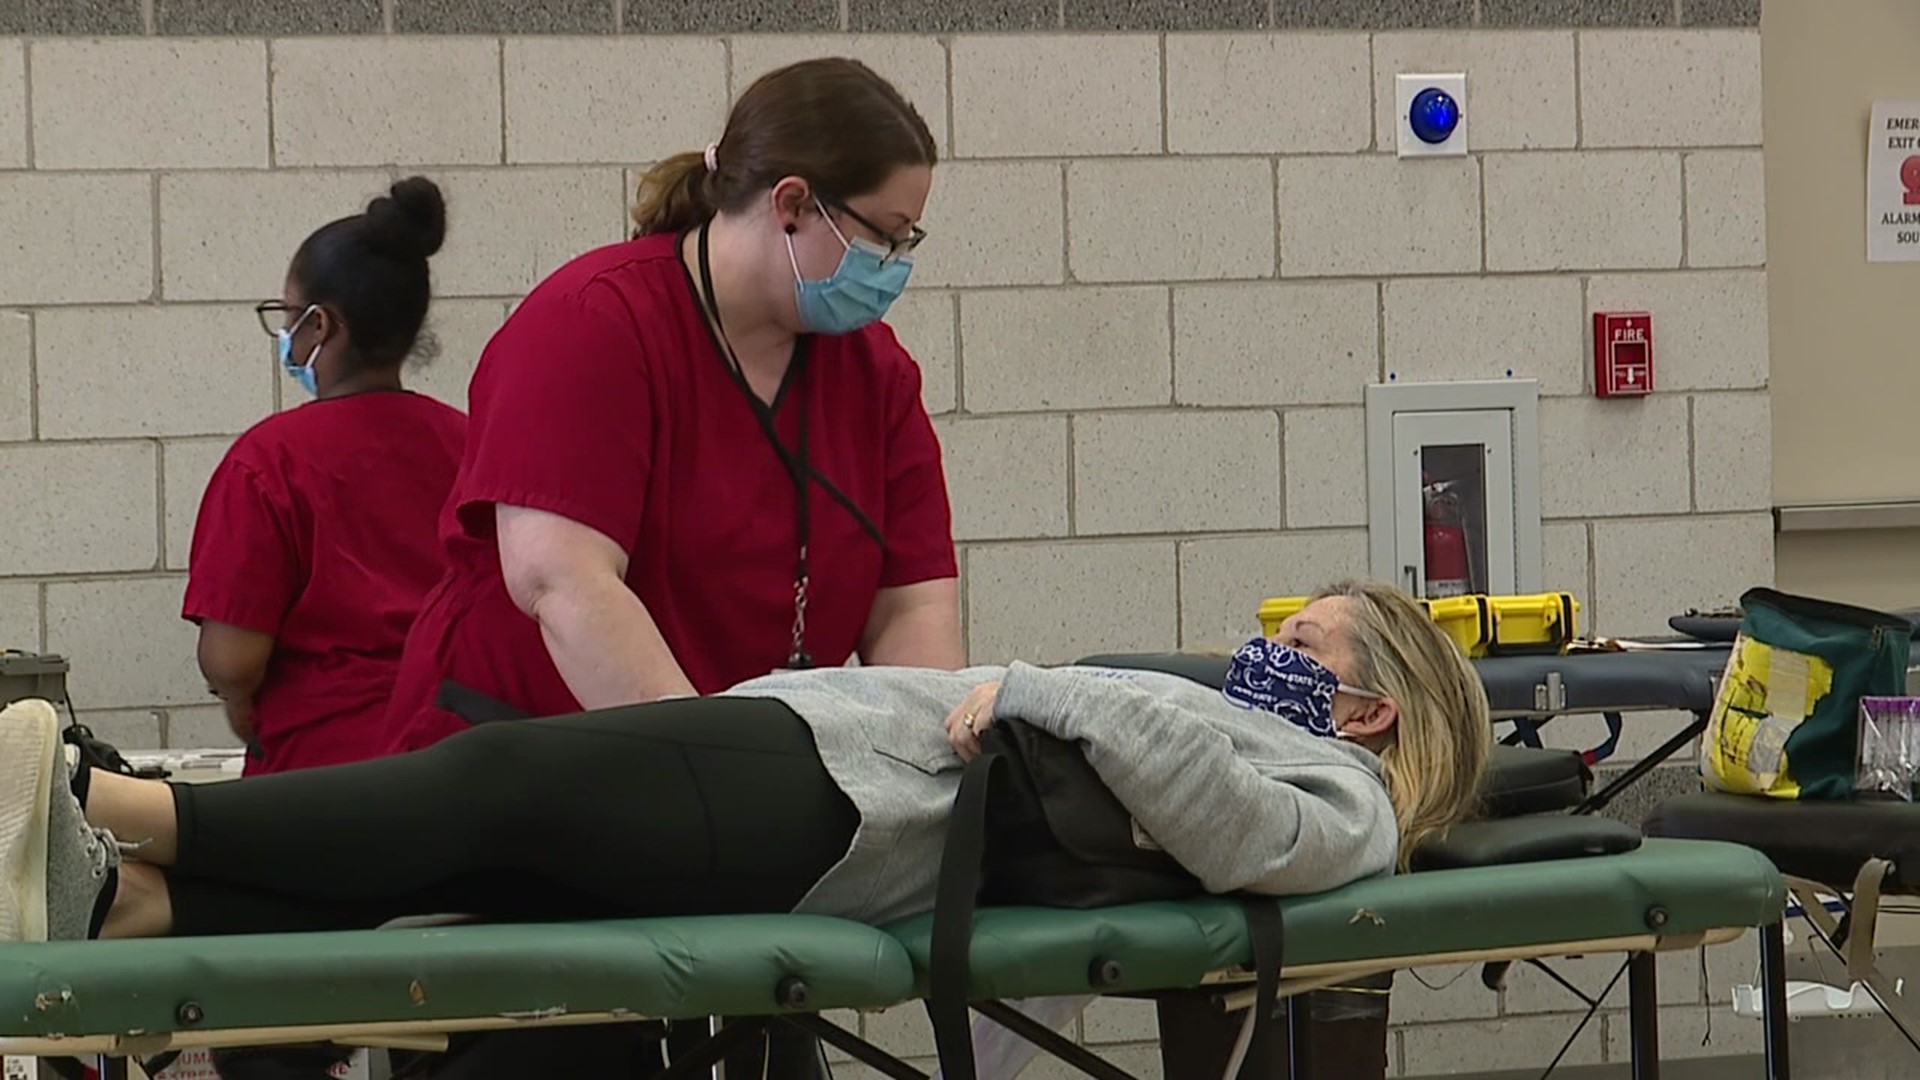 Blood donations are at an all-time low according to the Red Cross.